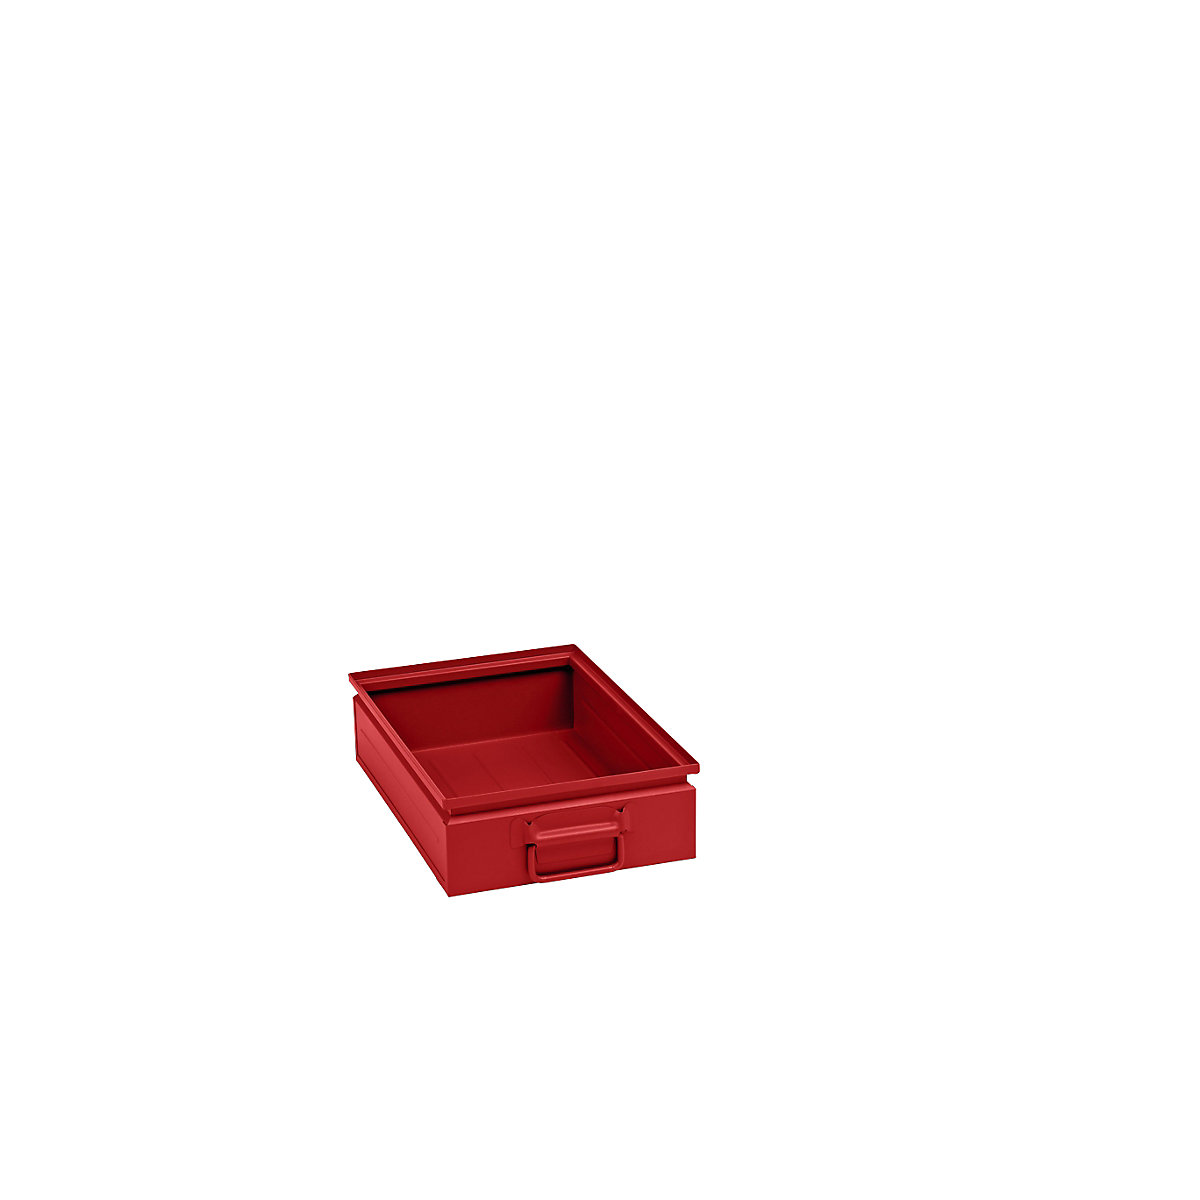 Stacking container made of sheet steel, capacity approx. 15 l, flame red RAL 3000